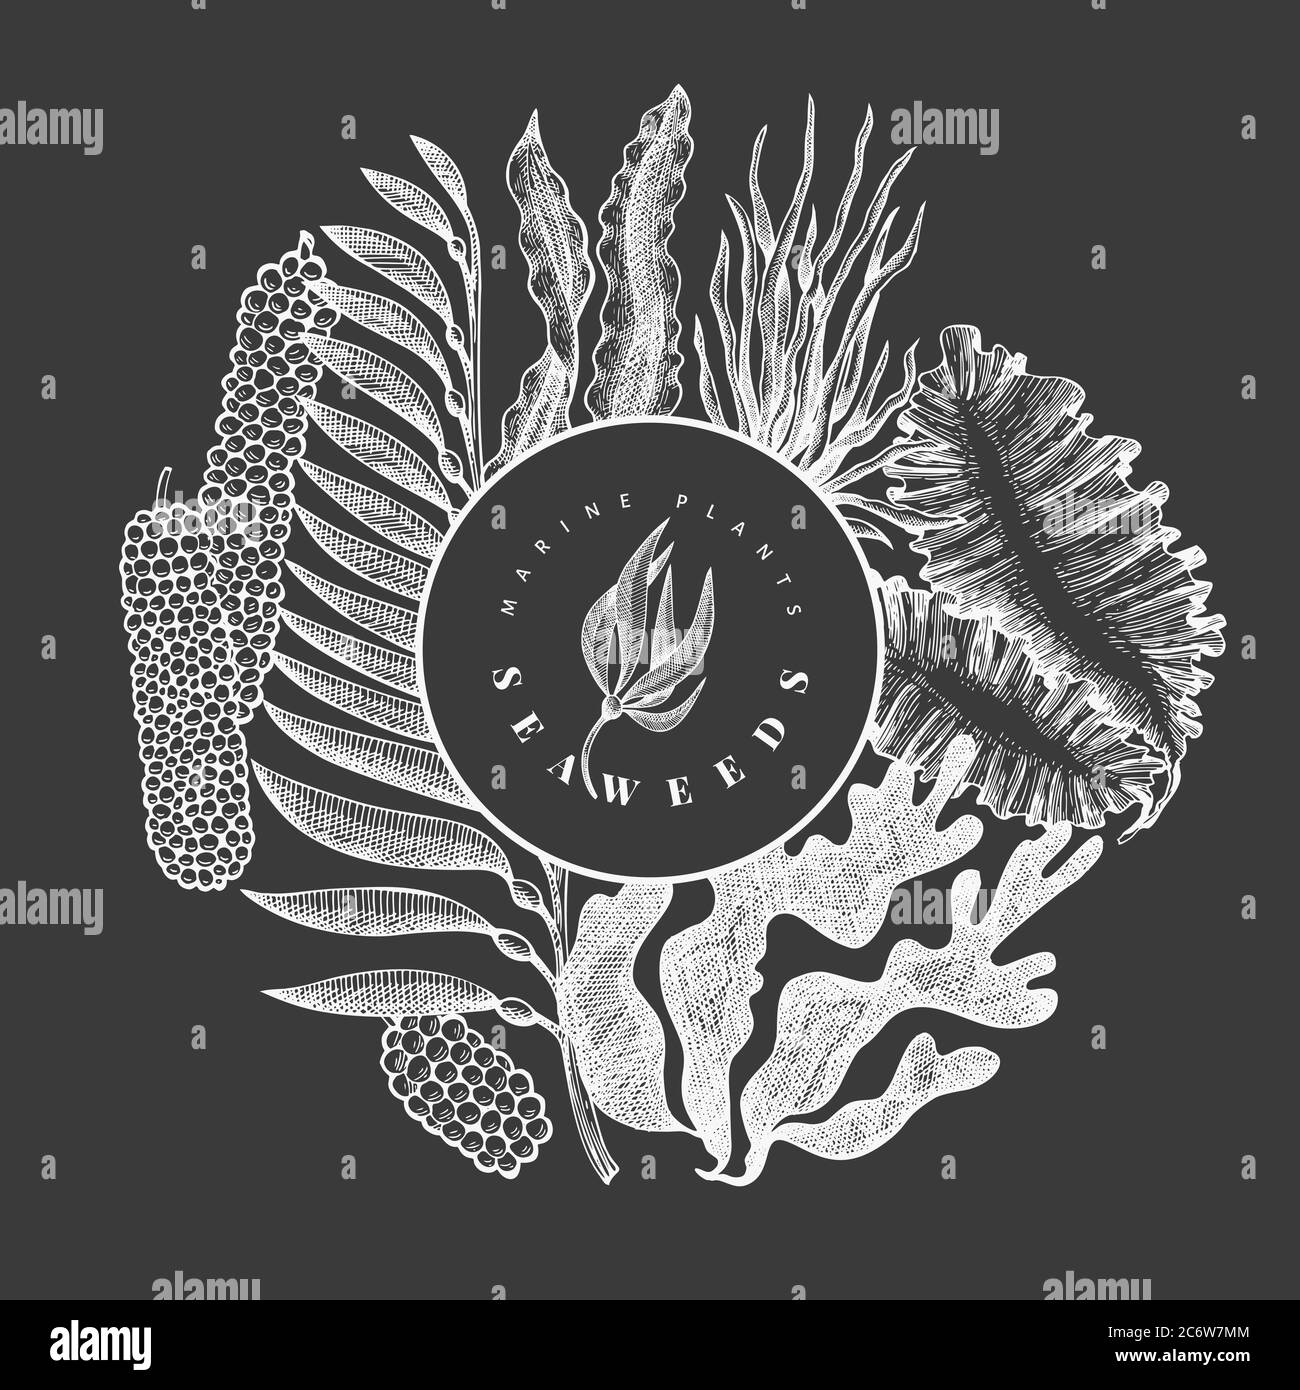 Seaweed design template. Hand drawn vector seaweeds illustration on chalk board. Engraved style sea food banner. Retro sea plants background Stock Vector